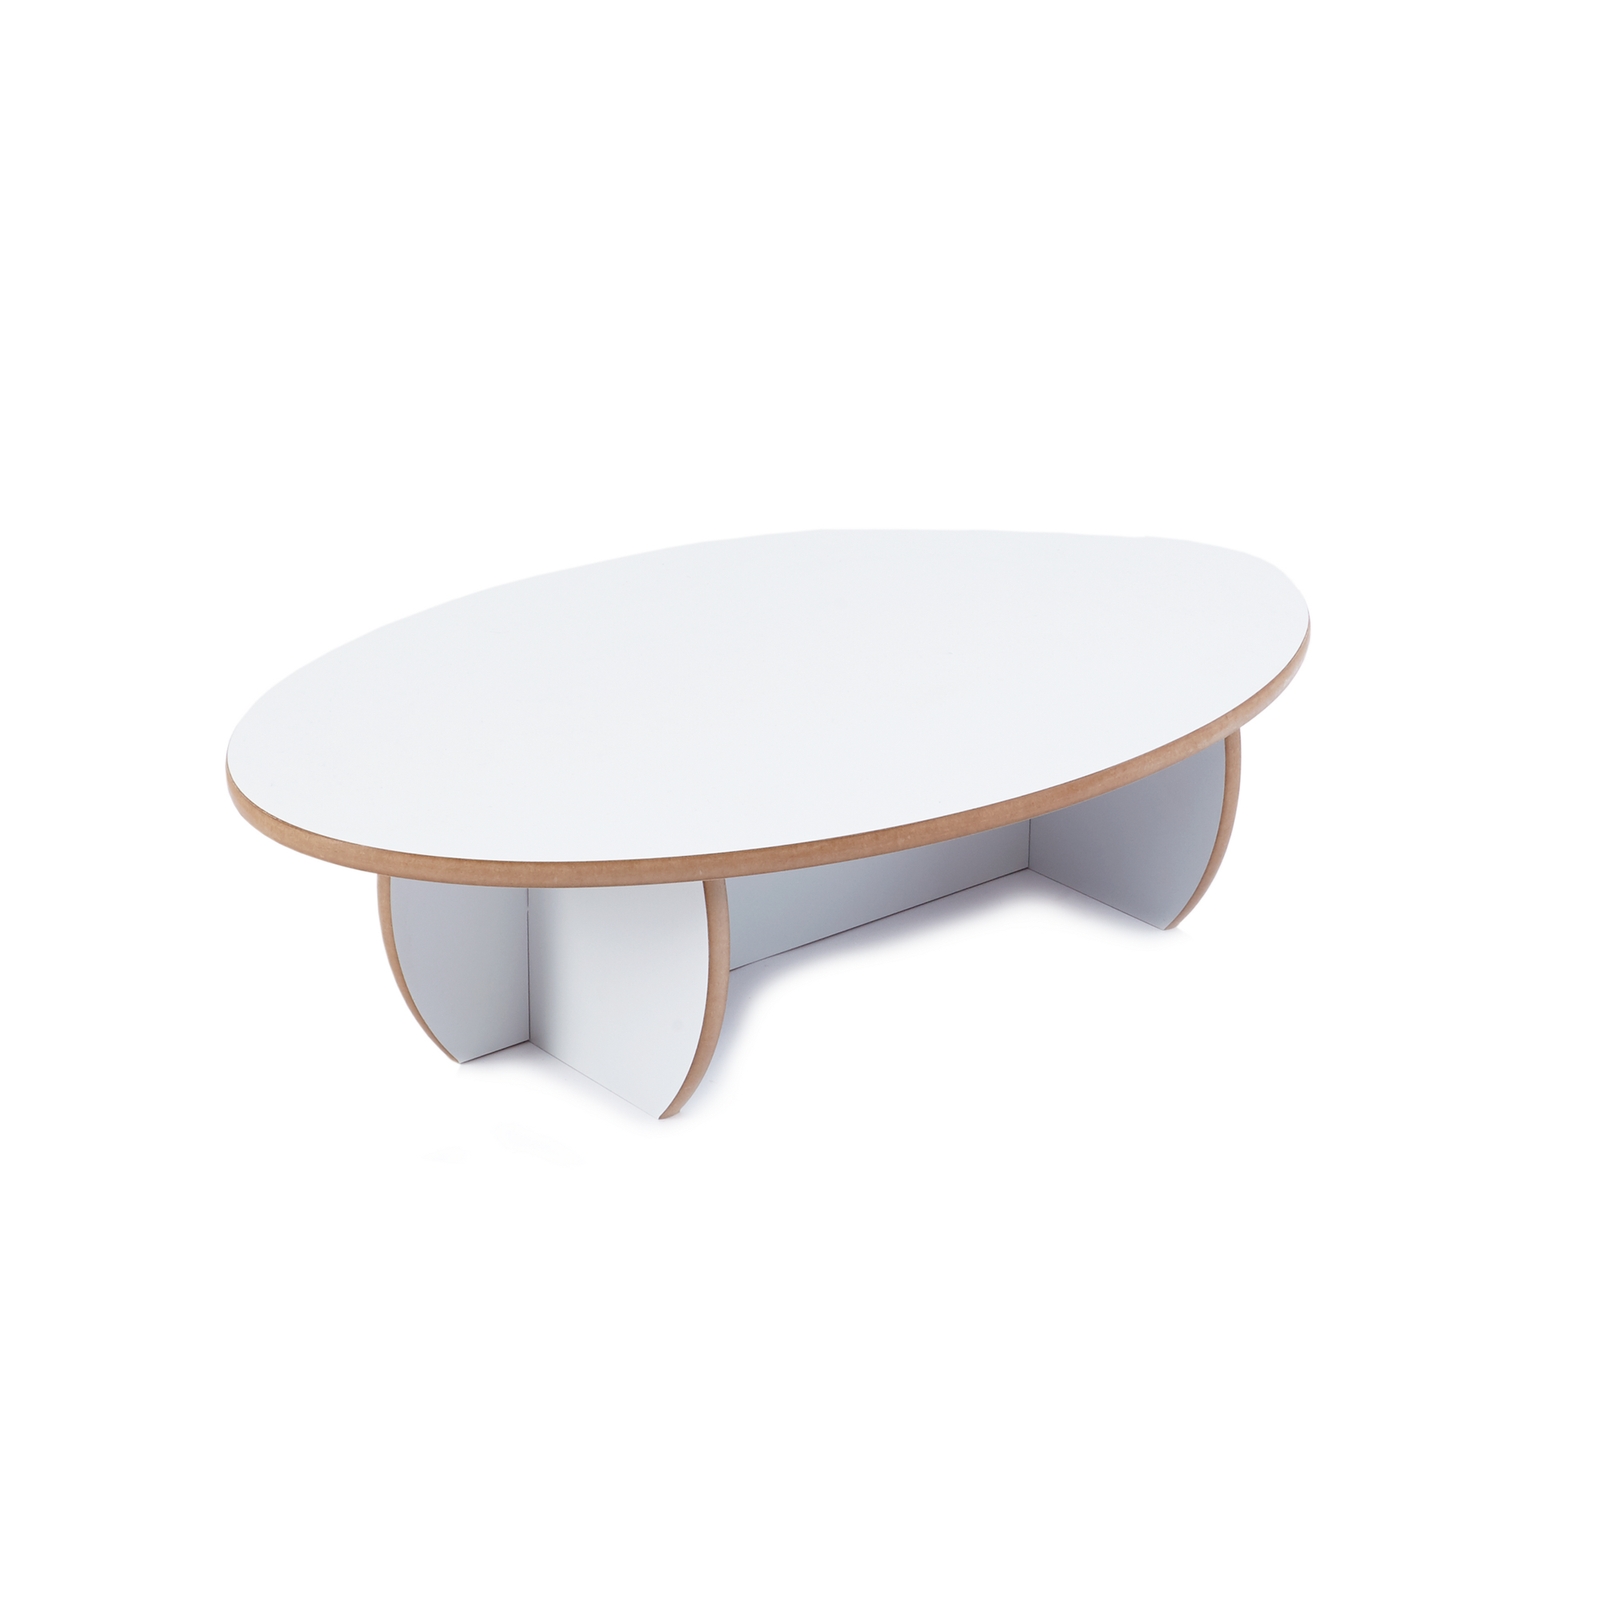 Toddler Table Grey